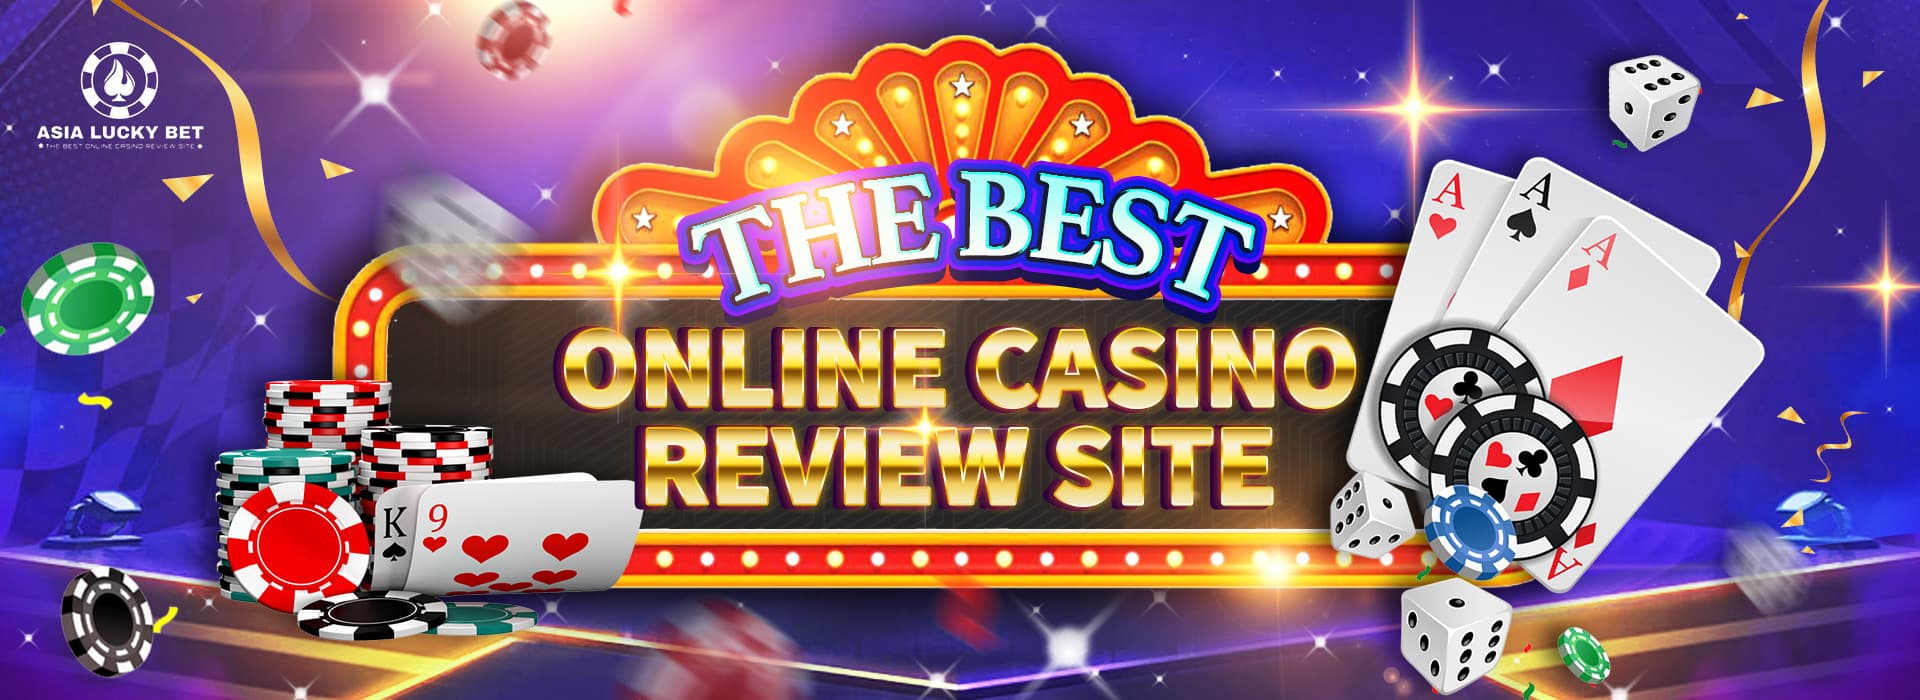 The best online casino review site